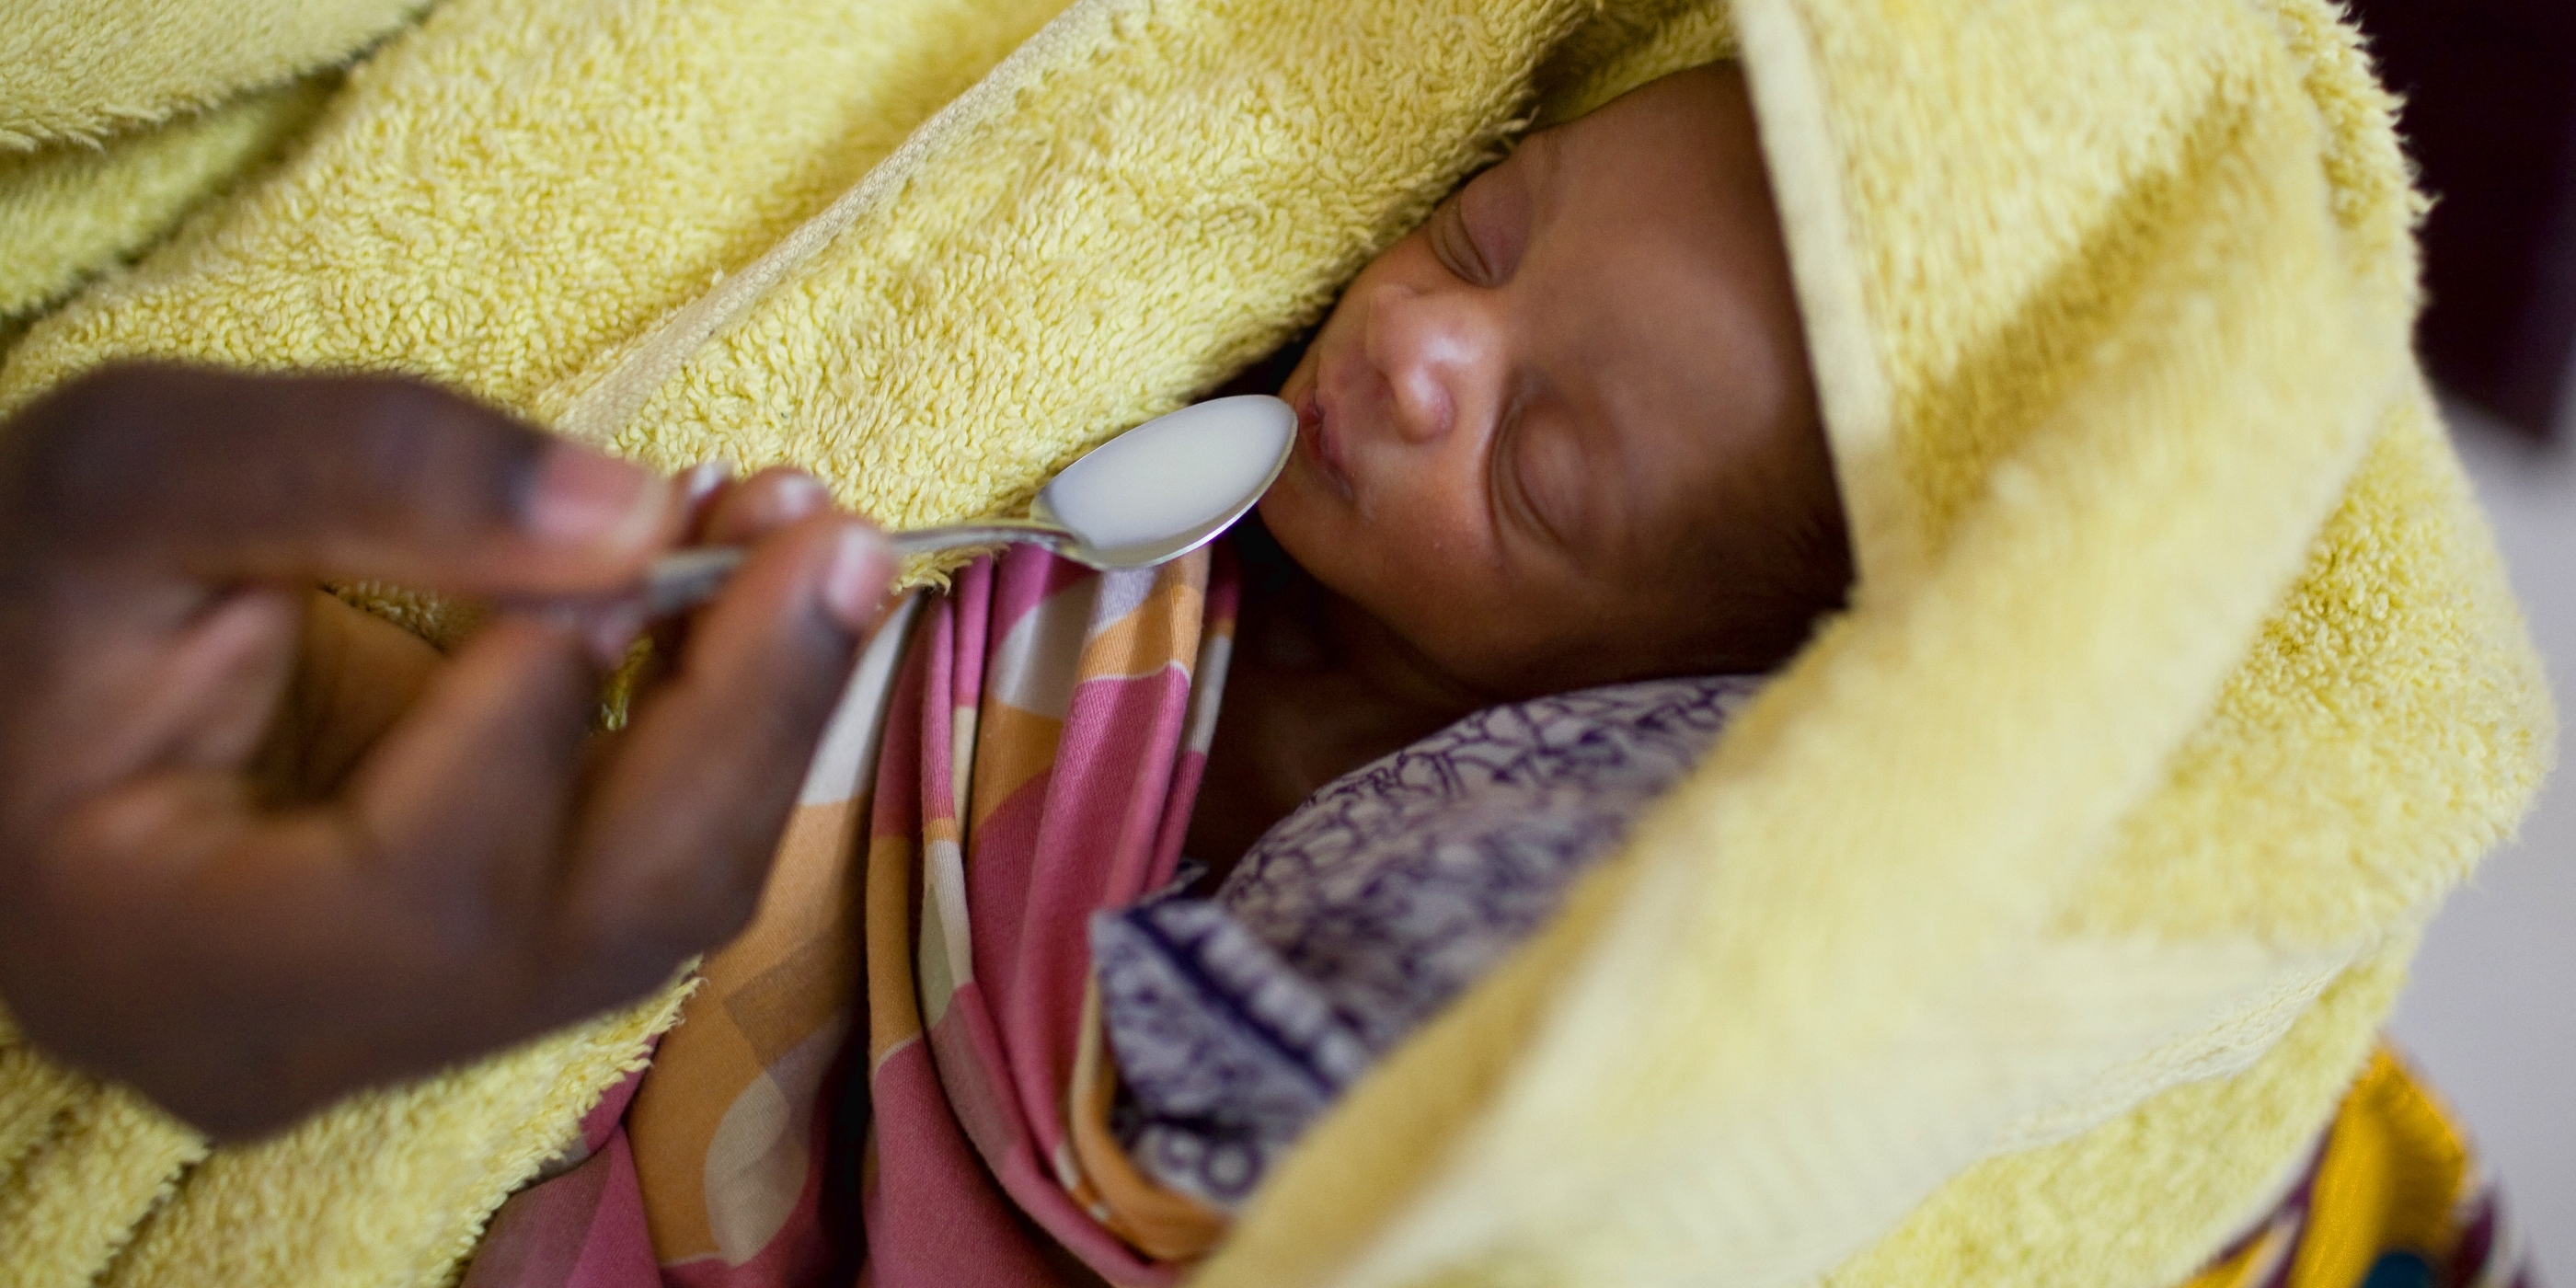 An eleven-day-old baby is cared for with help from a grant from the Bill and Melinda Gates Foundation. The babies were born one week premature and one weighed 4.1 pounds and the other 4.4 pounds. Photo Credit: Joshua Roberts/Save the Children 2010